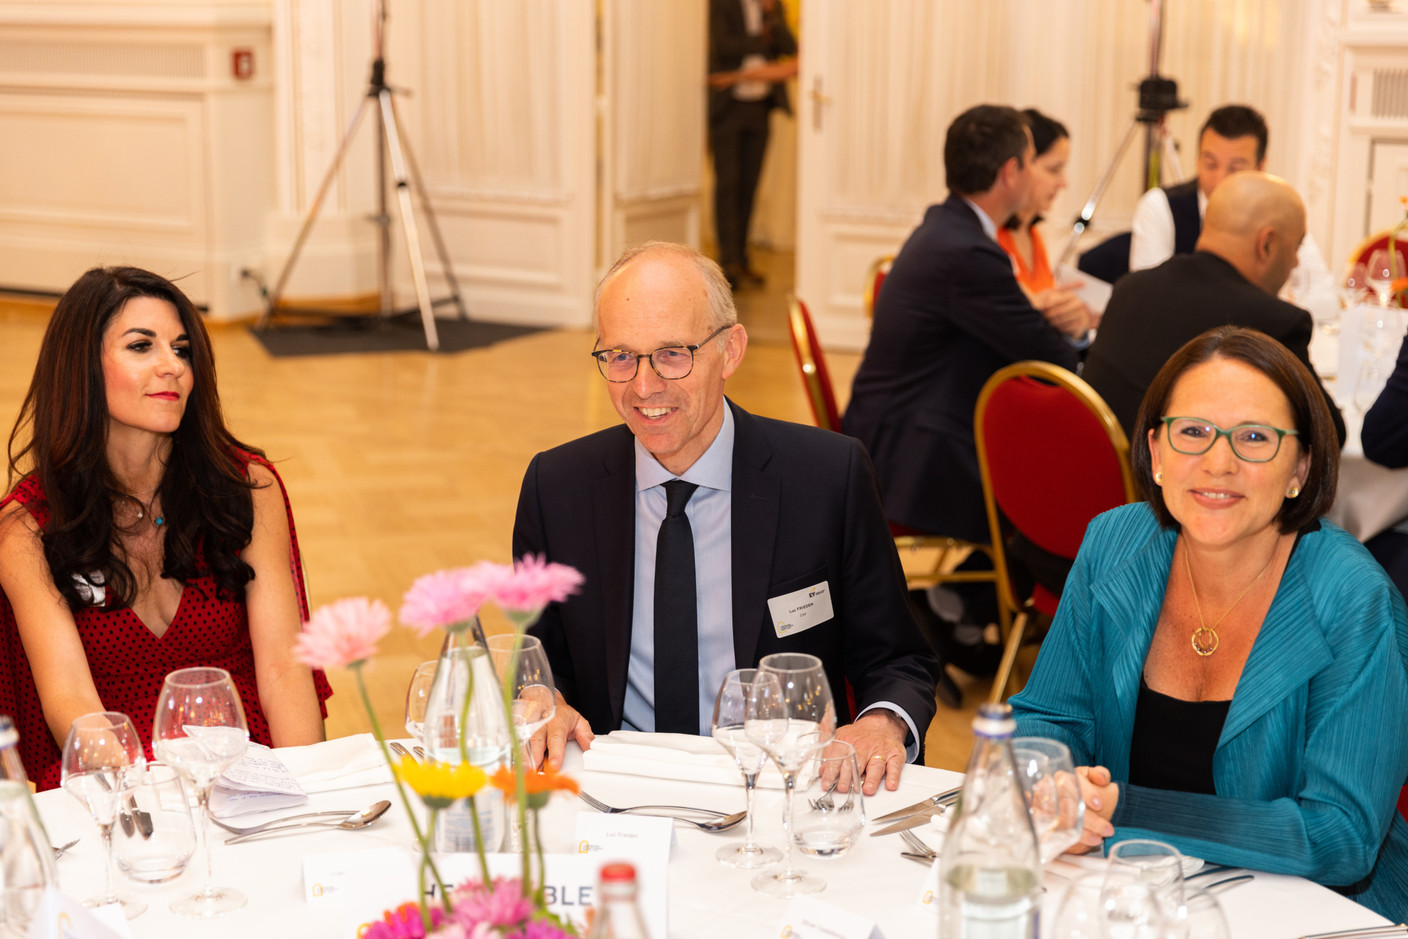 Lize-Mari Barnes (Swiss Re), Luc Frieden (CSV), Yuriko Backes (DP) at a gala dinner to launch EY Luxembourg's 2023 attractiveness survey, held at the Cercle Cité on 15 June. Photo: Romain Gamba/Maison Moderne